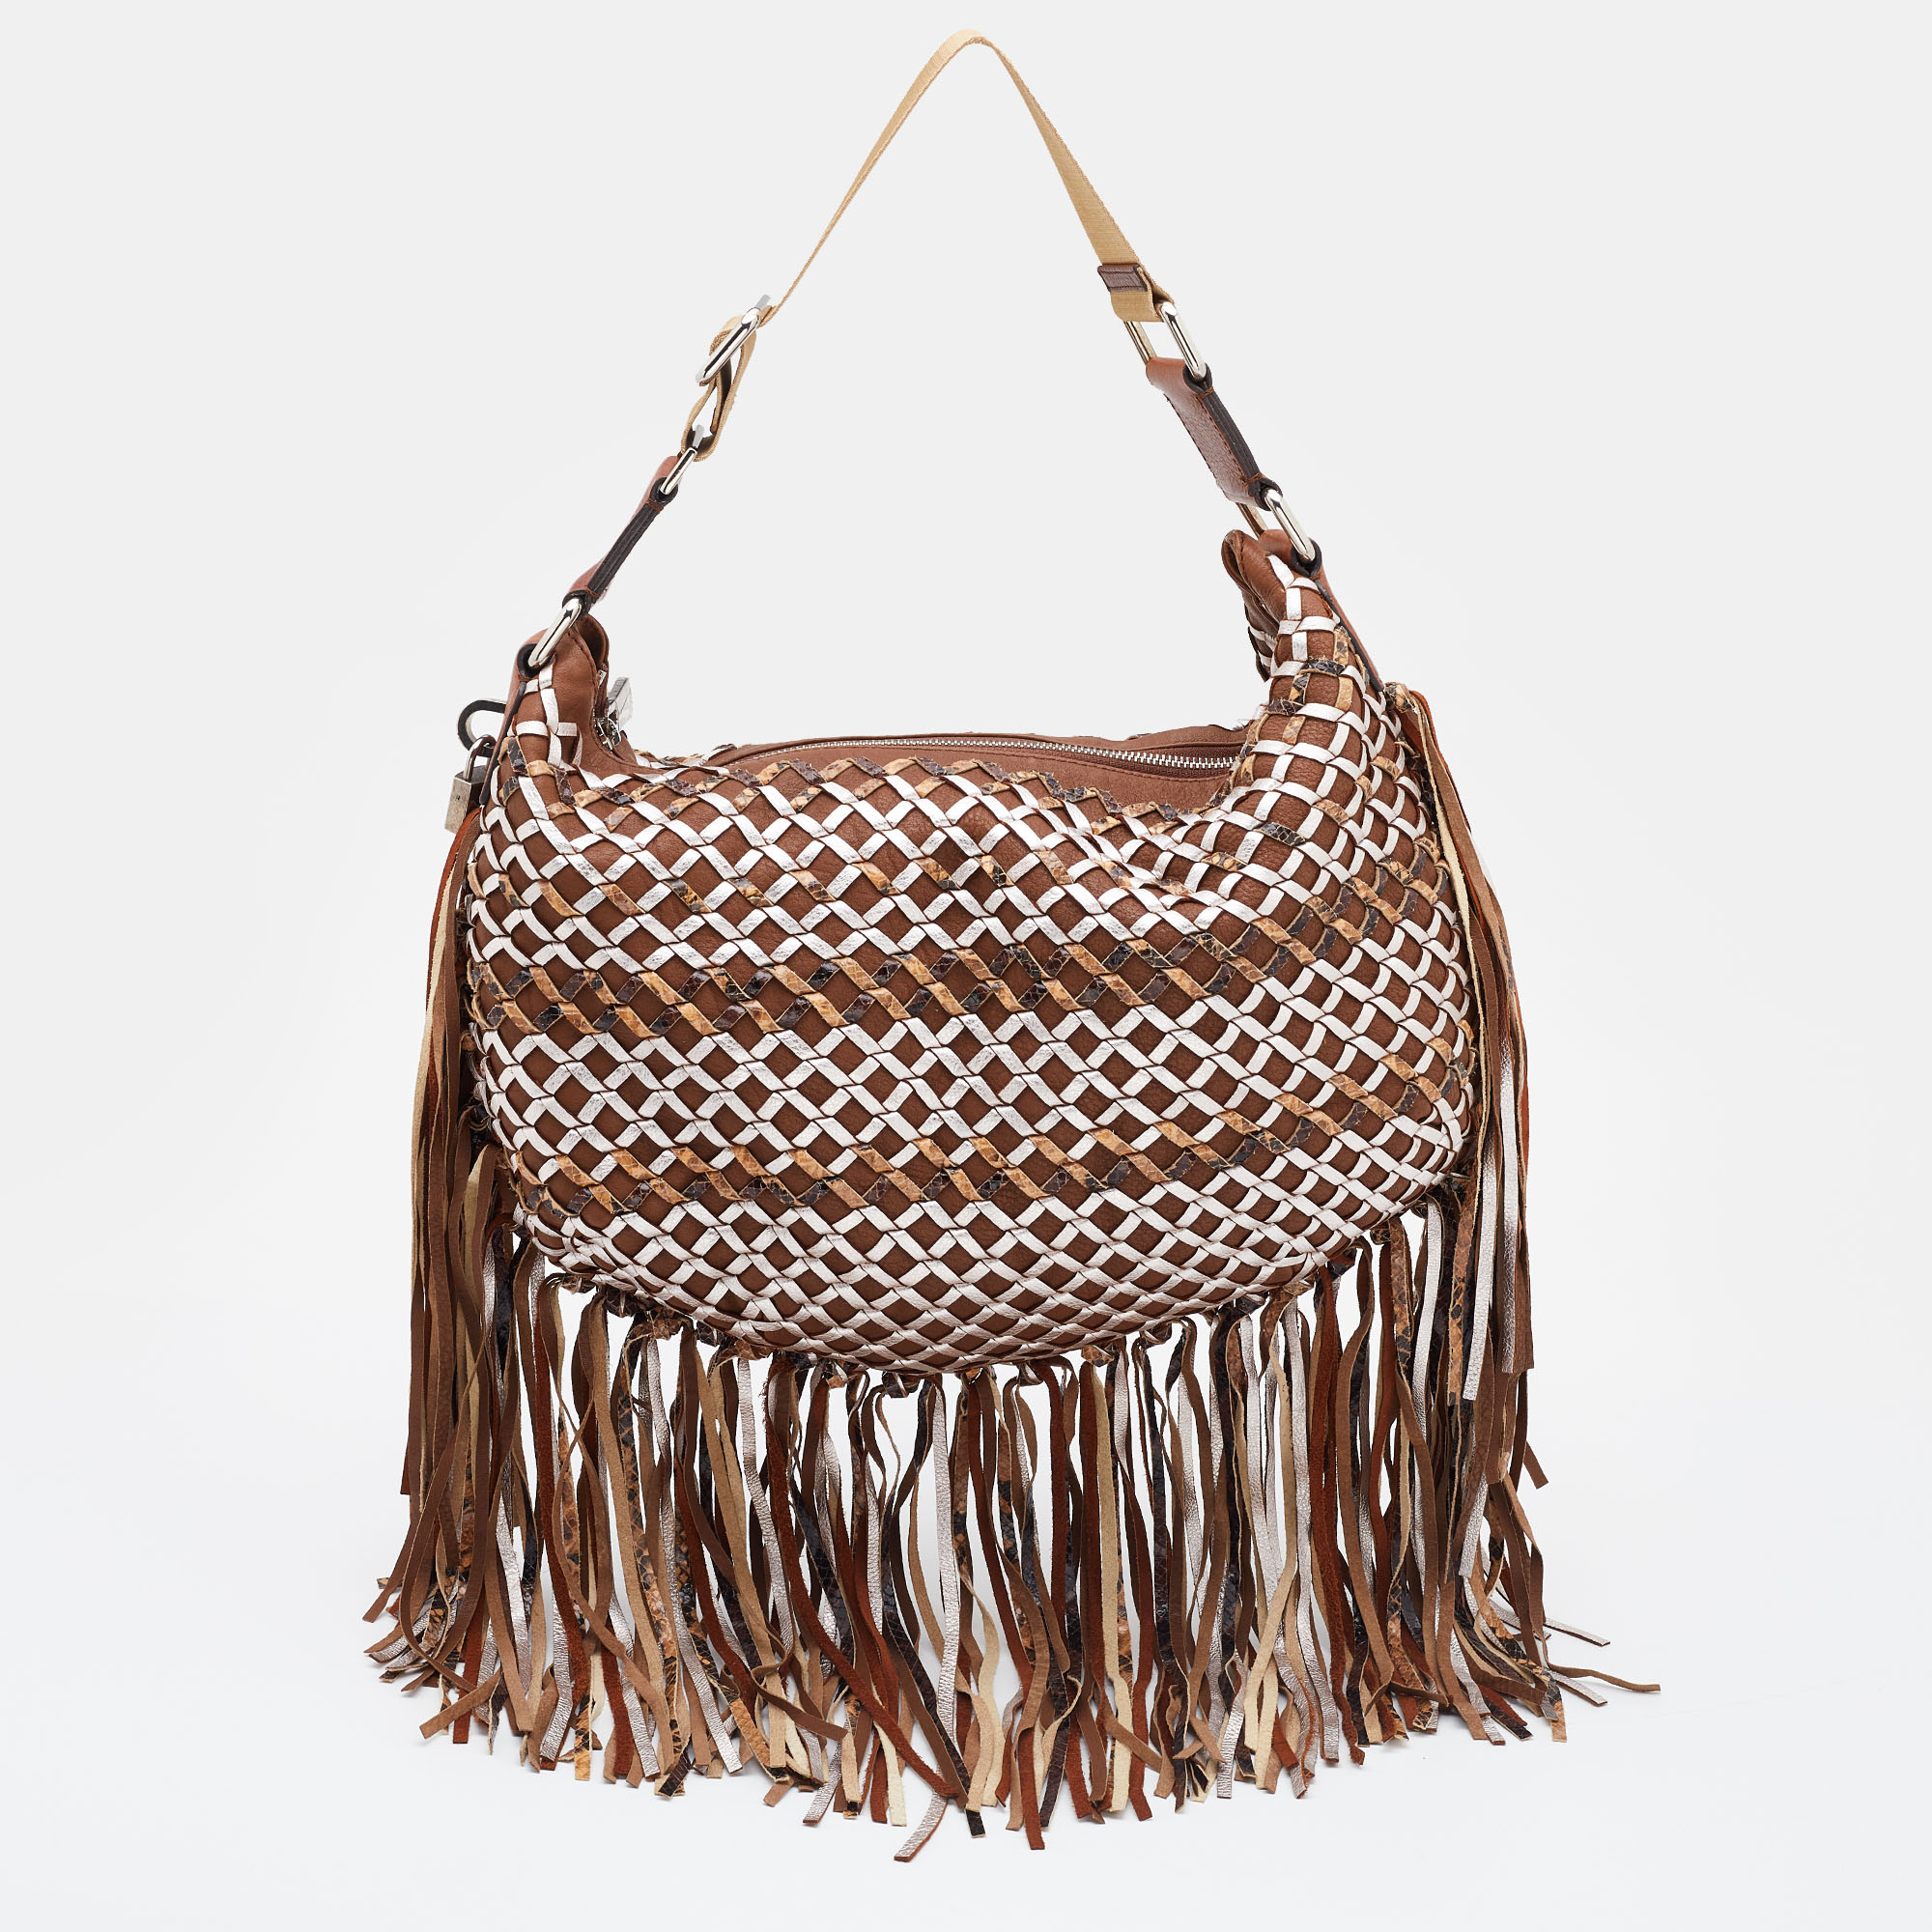 Marc jacobs brown/metallic woven leather and snakeskin embossed leather fringe hobo